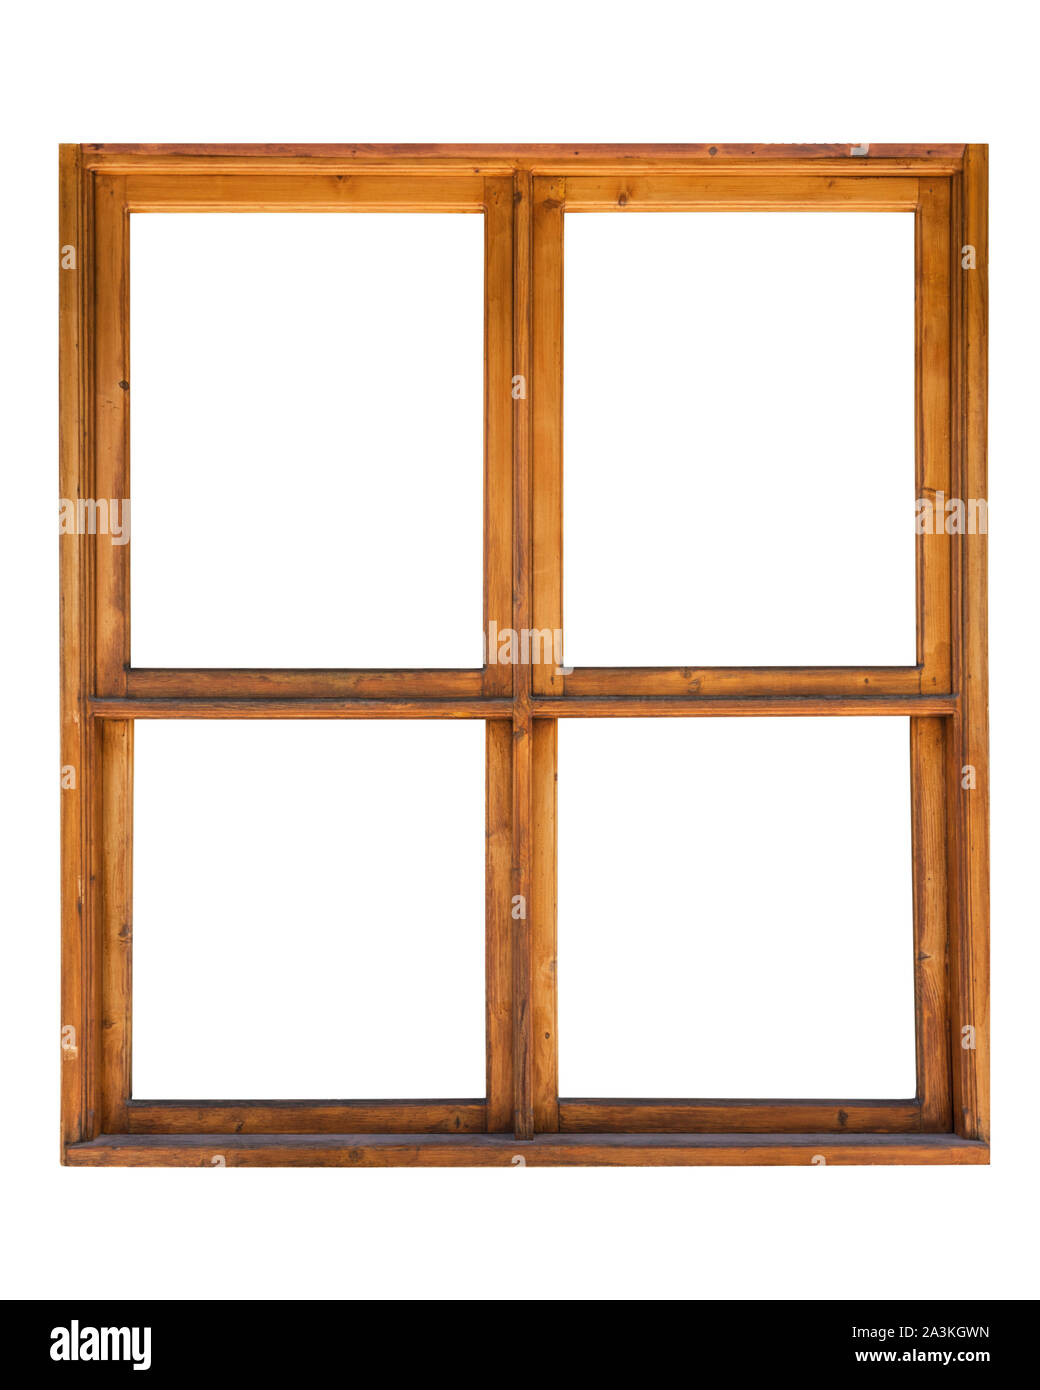 Frame of a wooden window isolated on white background Stock Photo